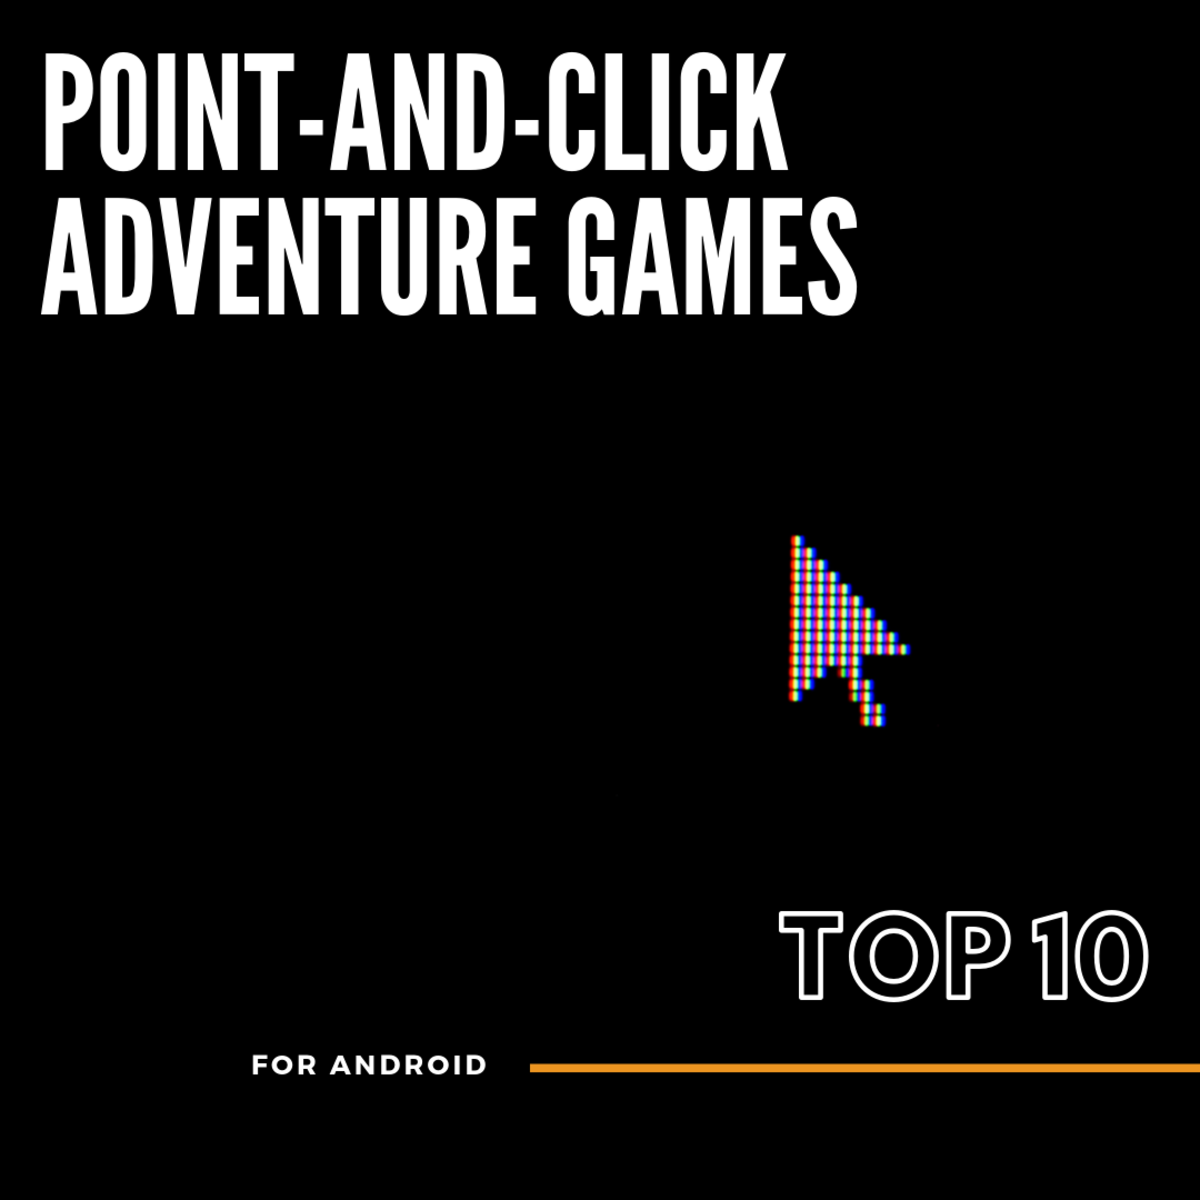 Point-and-click games for your Android are hard to find, so here's a list of the top 10 that will look just as good on your phone as they do on your computer!